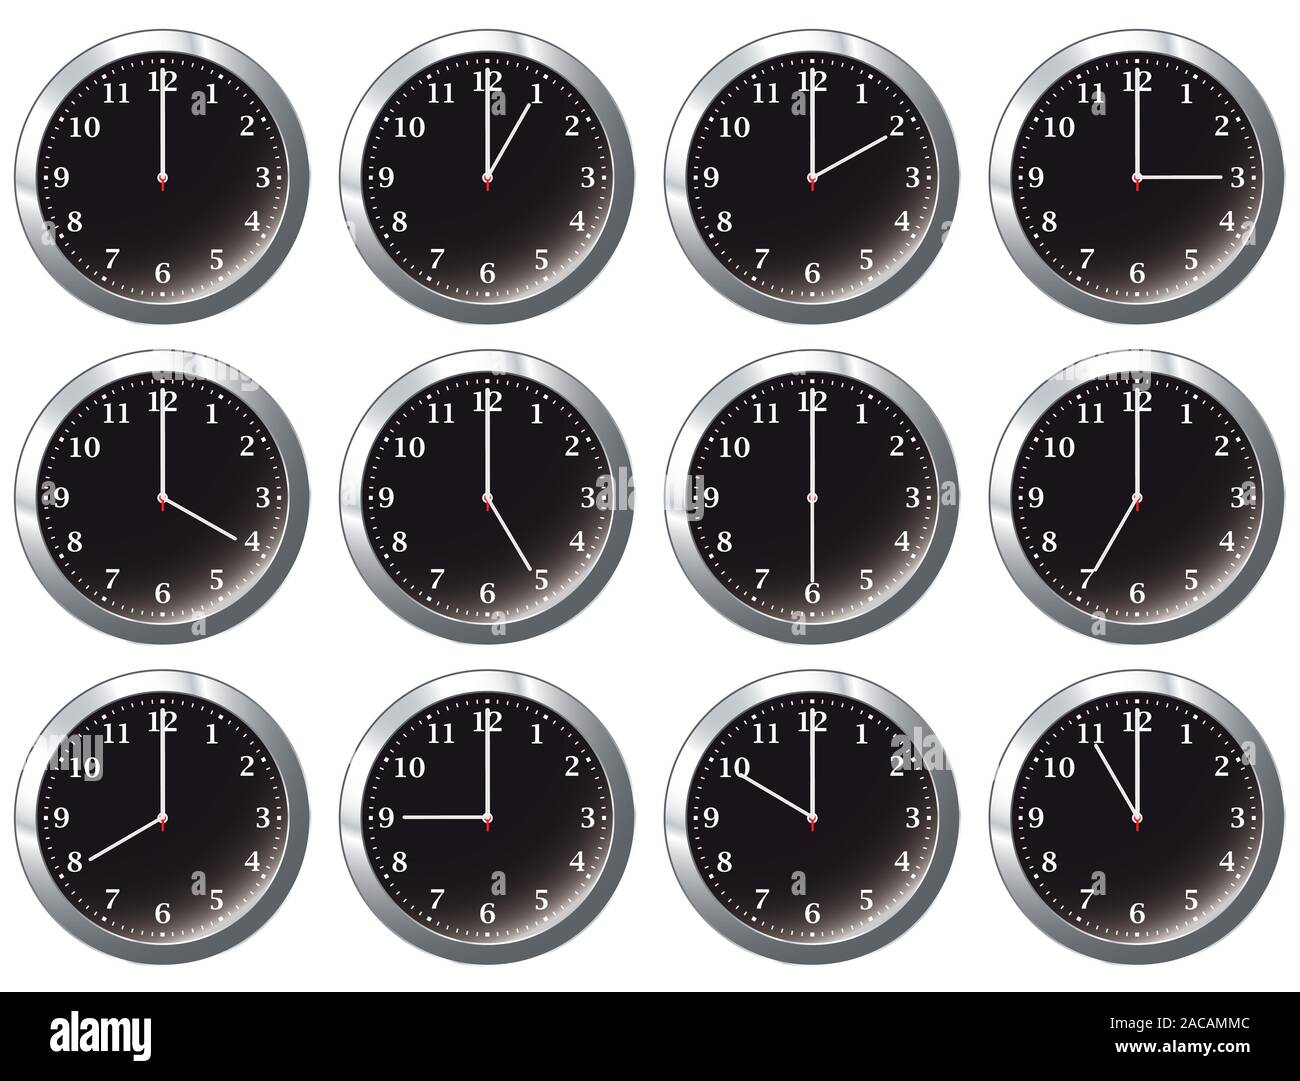 office clock black all times Stock Photo